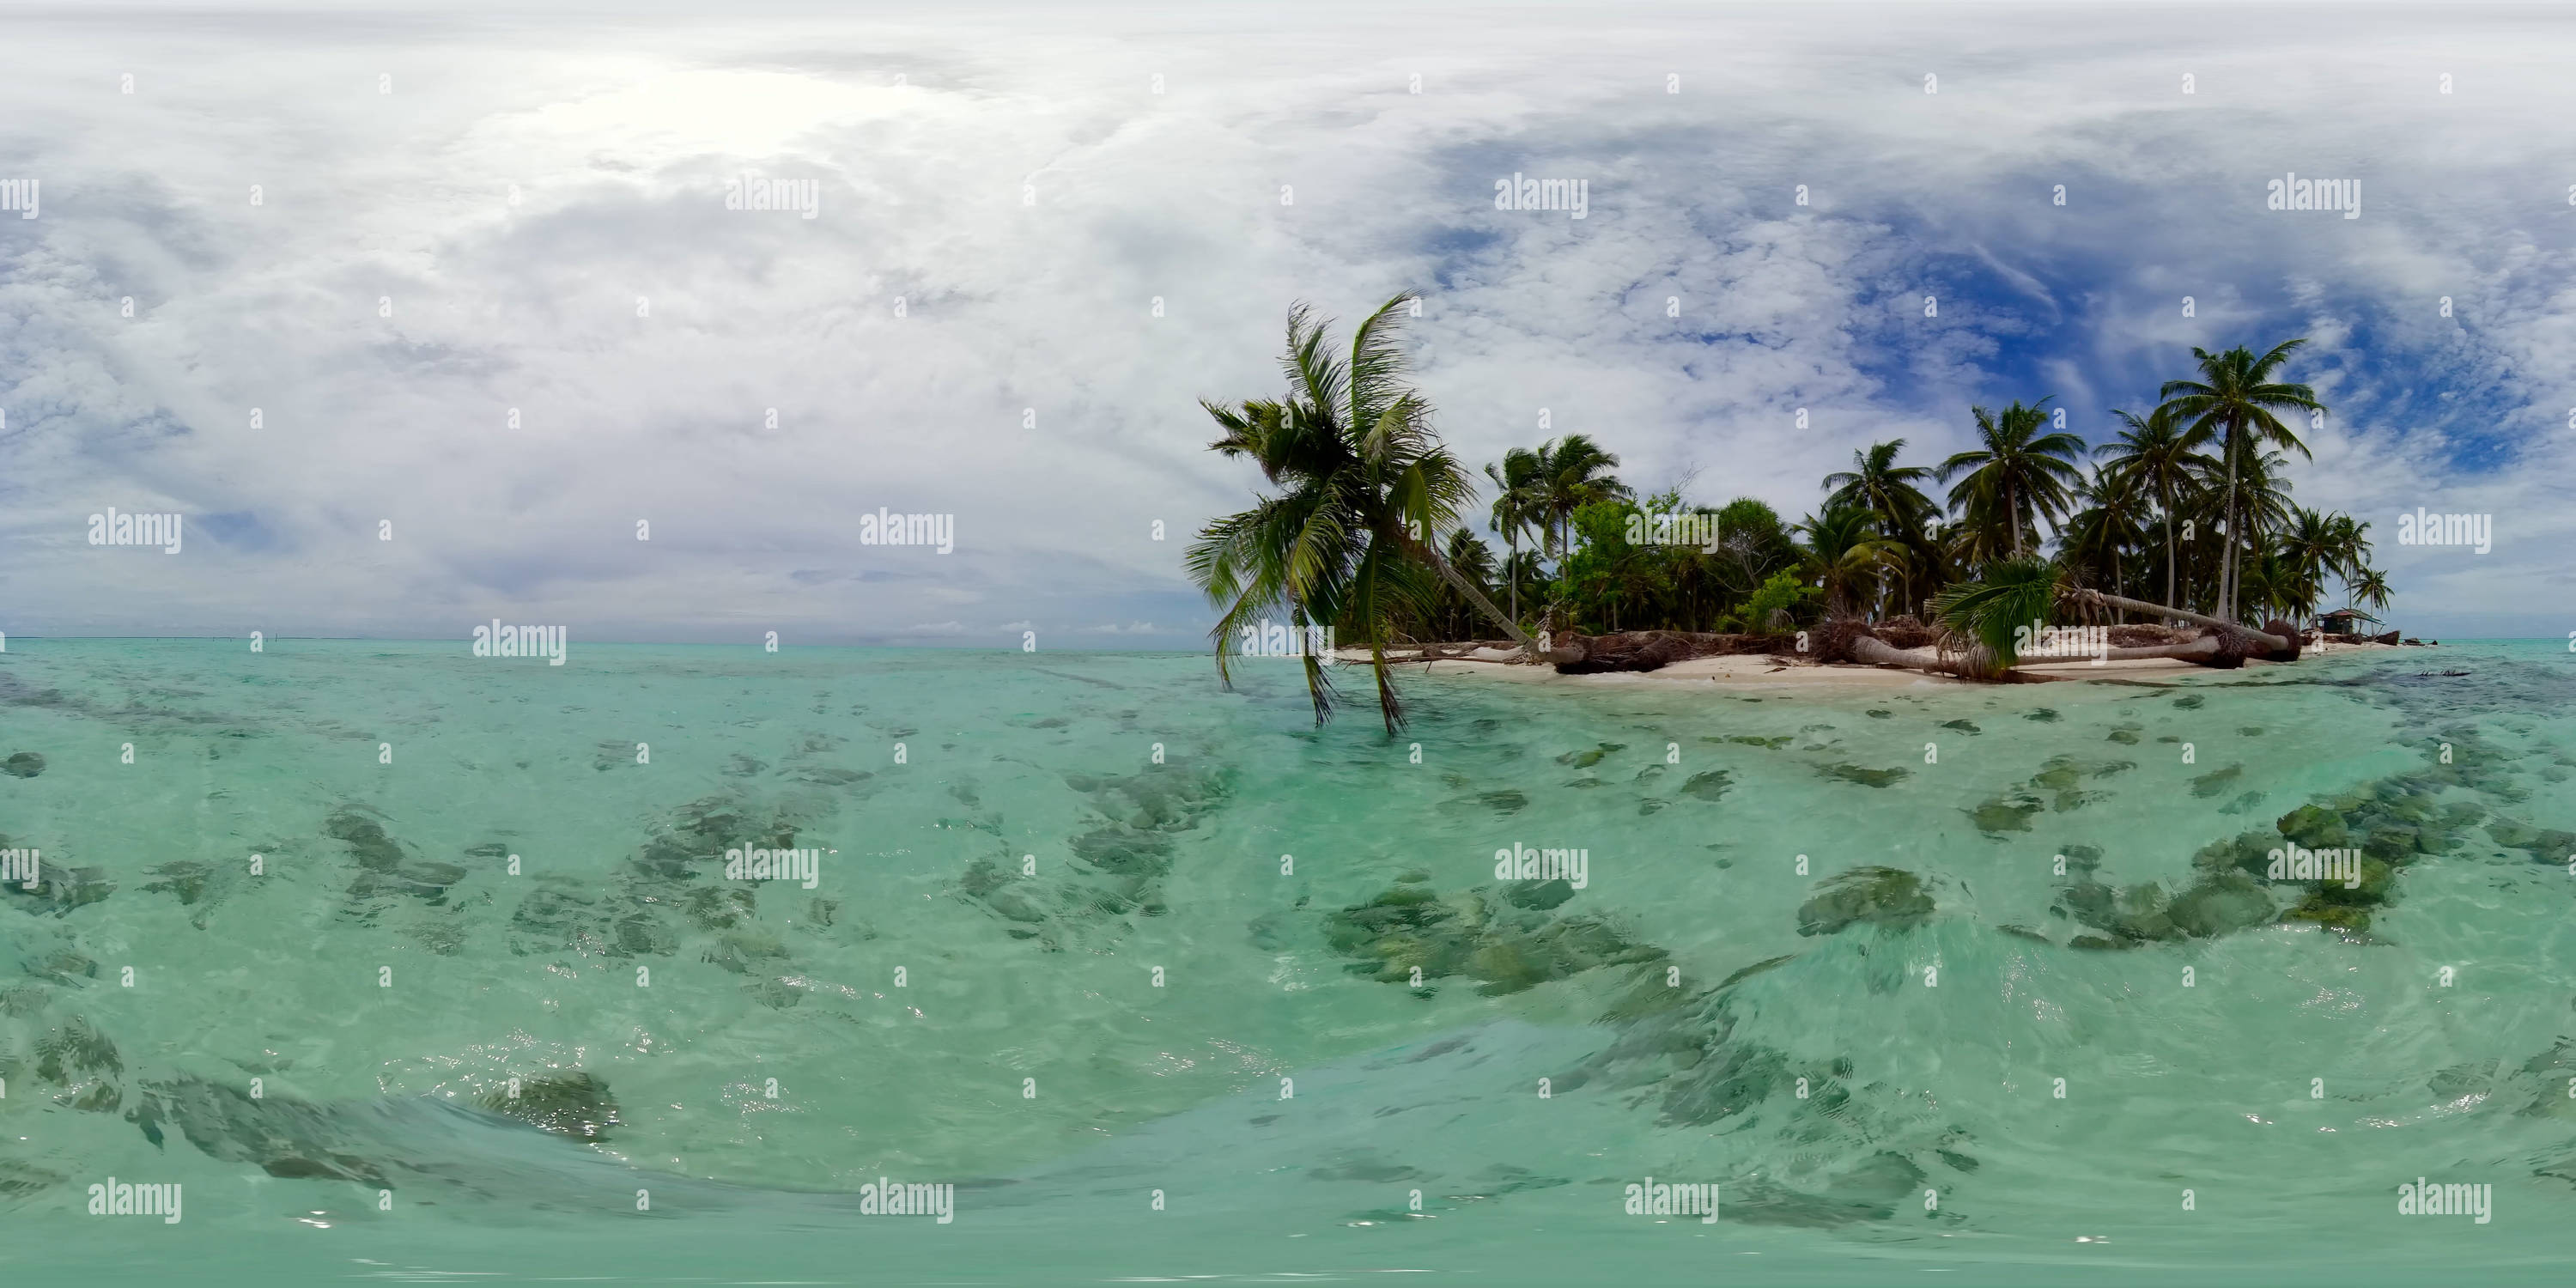 360 degree panoramic view of Seascape with tropical sandy beach and blue ocean. Onok Island, Palawan